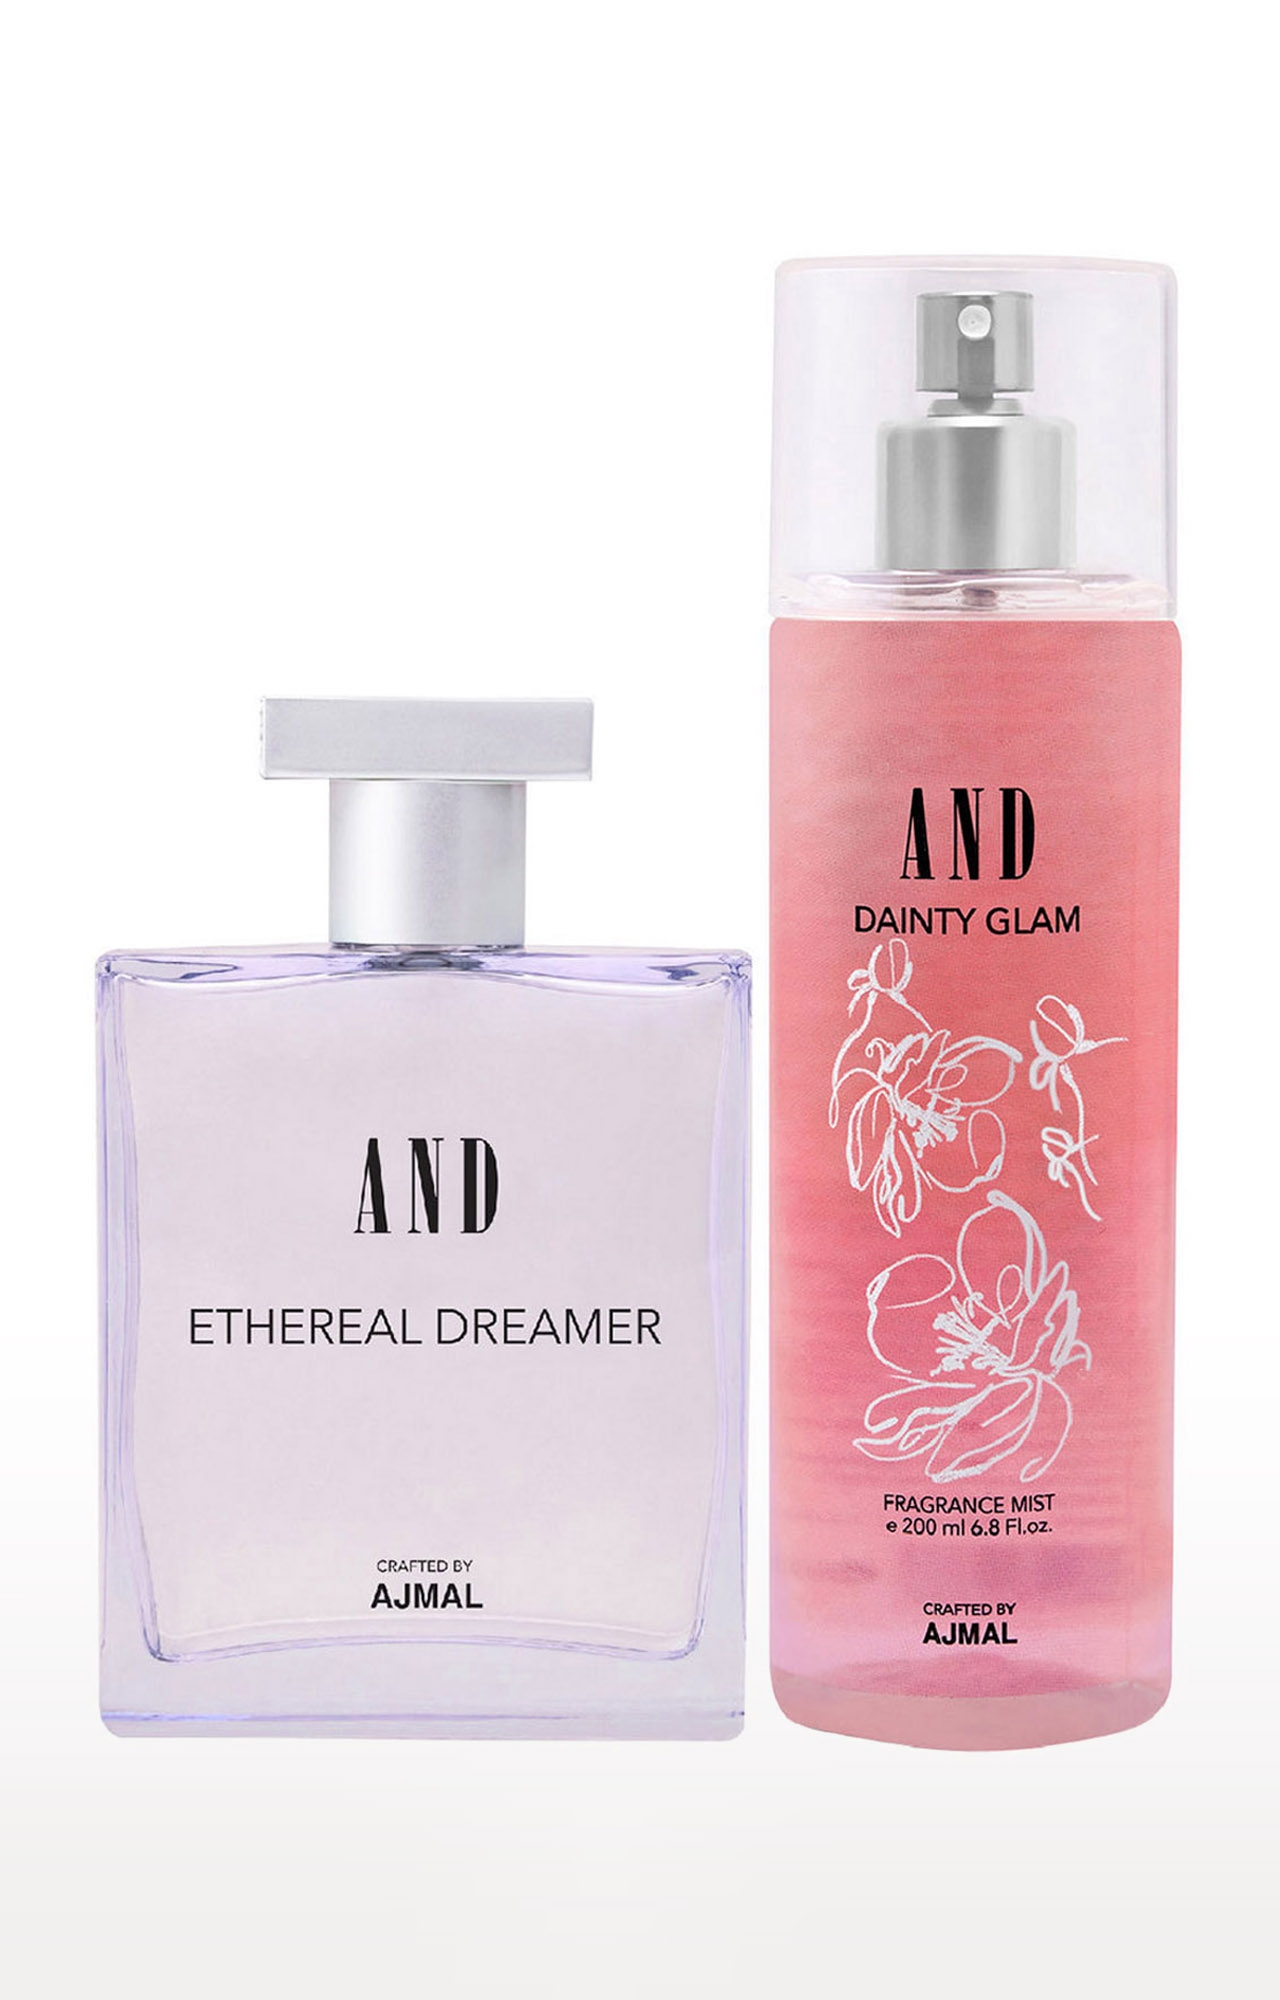 AND Ethereal Dreamer Eau De Parfum 100ML & Dainty Glam Body Mist 200ML Pack of 2 for Women Crafted by Ajmal 